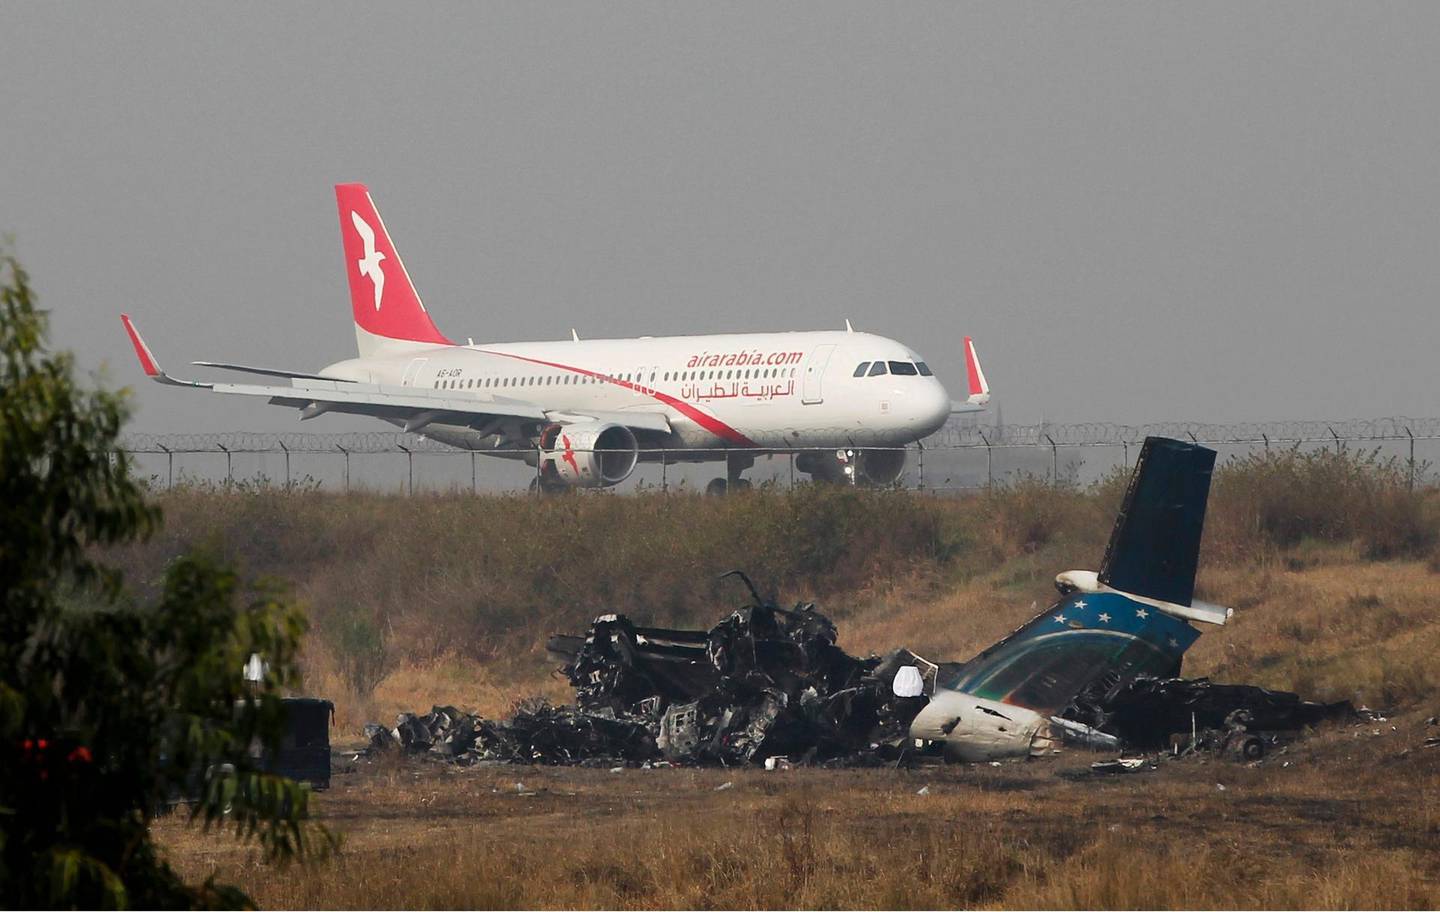 Remains of Bangladesh's US-Bangla Flight BS211 lies on the ground as a plane takes off from Tribhuvan International Airport in Kathmandu, Nepal, Tuesday, March 13, 2018. The plane, which was coming from Bangladesh, was flying low and erratically before striking the ground and erupting in flames on Monday. US-Bangla Airlines Flight BS211 from Dhaka to Kathmandu was carrying 67 passengers and four crew members. (AP Photo/Niranjan Shrestha)